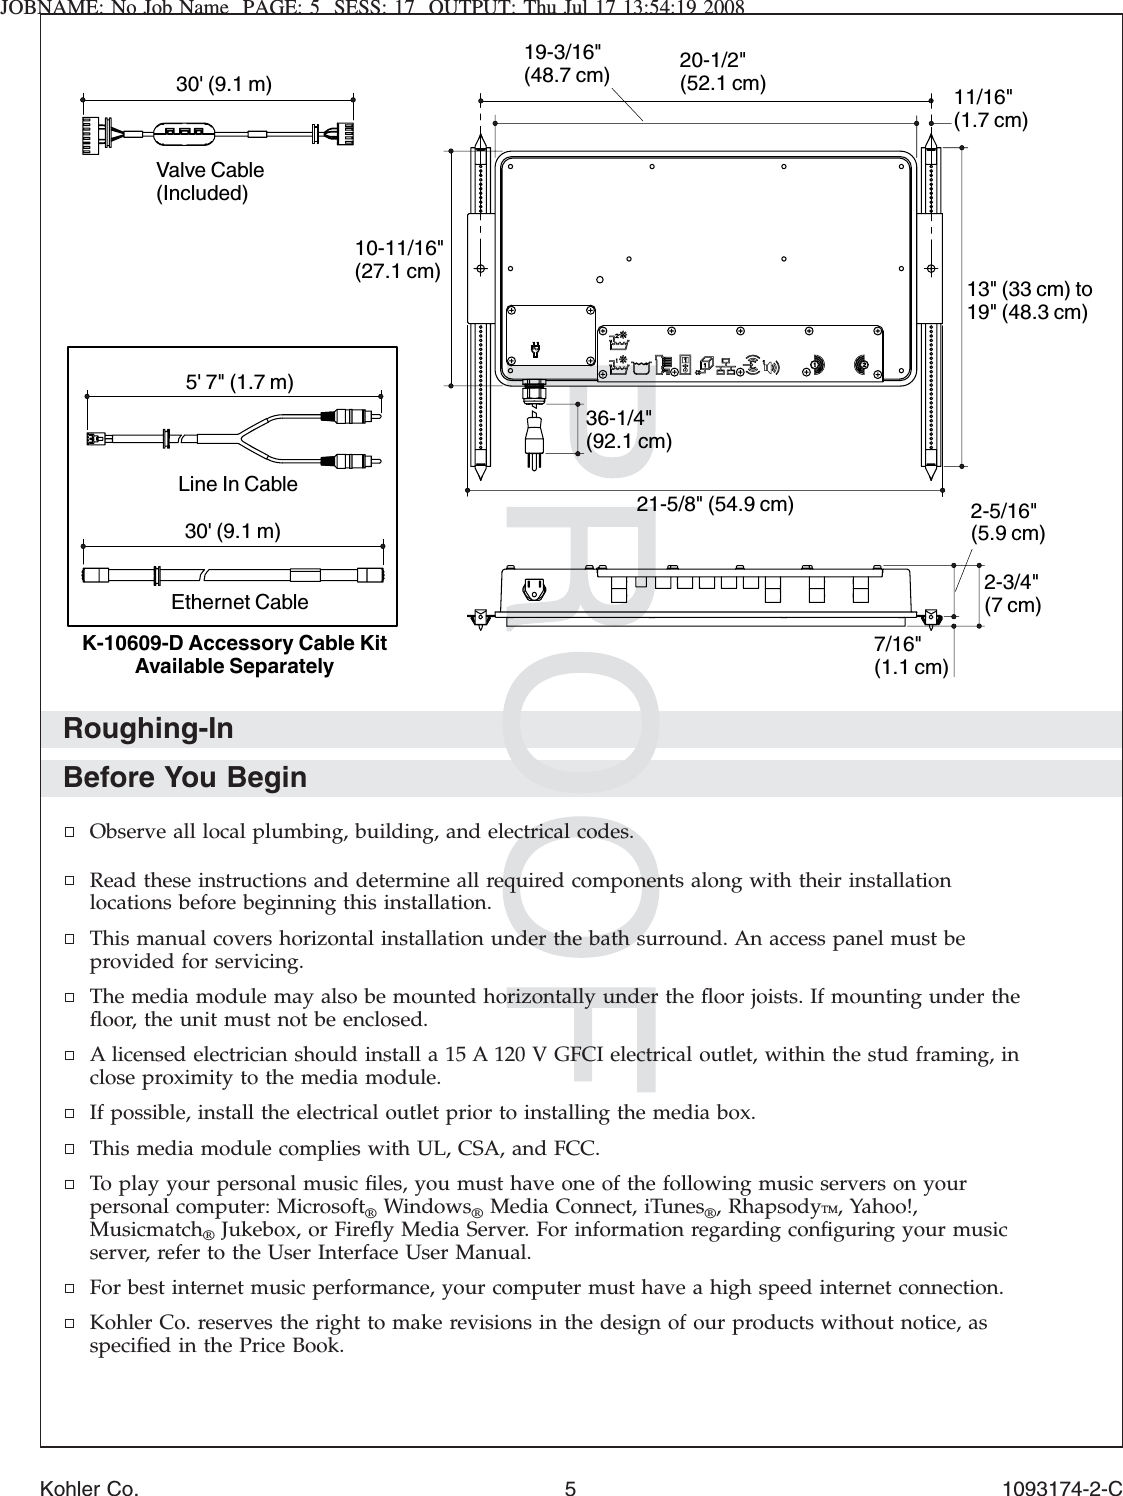 JOBNAME: No Job Name PAGE: 5 SESS: 17 OUTPUT: Thu Jul 17 13:54:19 2008Roughing-InBefore You BeginObserve all local plumbing, building, and electrical codes.Read these instructions and determine all required components along with their installationlocations before beginning this installation.This manual covers horizontal installation under the bath surround. An access panel must beprovided for servicing.The media module may also be mounted horizontally under the ﬂoor joists. If mounting under theﬂoor, the unit must not be enclosed.A licensed electrician should install a 15 A 120 V GFCI electrical outlet, within the stud framing, inclose proximity to the media module.If possible, install the electrical outlet prior to installing the media box.This media module complies with UL, CSA, and FCC.To play your personal music ﬁles, you must have one of the following music servers on yourpersonal computer: Microsoft®Windows®Media Connect, iTunes®, RhapsodyTM, Yahoo!,Musicmatch®Jukebox, or Fireﬂy Media Server. For information regarding conﬁguring your musicserver, refer to the User Interface User Manual.For best internet music performance, your computer must have a high speed internet connection.Kohler Co. reserves the right to make revisions in the design of our products without notice, asspeciﬁed in the Price Book.2-3/4&quot; (7 cm)7/16&quot; (1.1 cm)2-5/16&quot; (5.9 cm)21-5/8&quot; (54.9 cm)20-1/2&quot; (52.1 cm) 11/16&quot; (1.7 cm)19-3/16&quot; (48.7 cm)13&quot; (33 cm) to 19&quot; (48.3 cm)36-1/4&quot; (92.1 cm)10-11/16&quot; (27.1 cm)30&apos; (9.1 m)Valve Cable(Included)30&apos; (9.1 m)5&apos; 7&quot; (1.7 m)Ethernet CableLine In CableK-10609-D Accessory Cable Kit Available SeparatelyKohler Co. 5 1093174-2-C